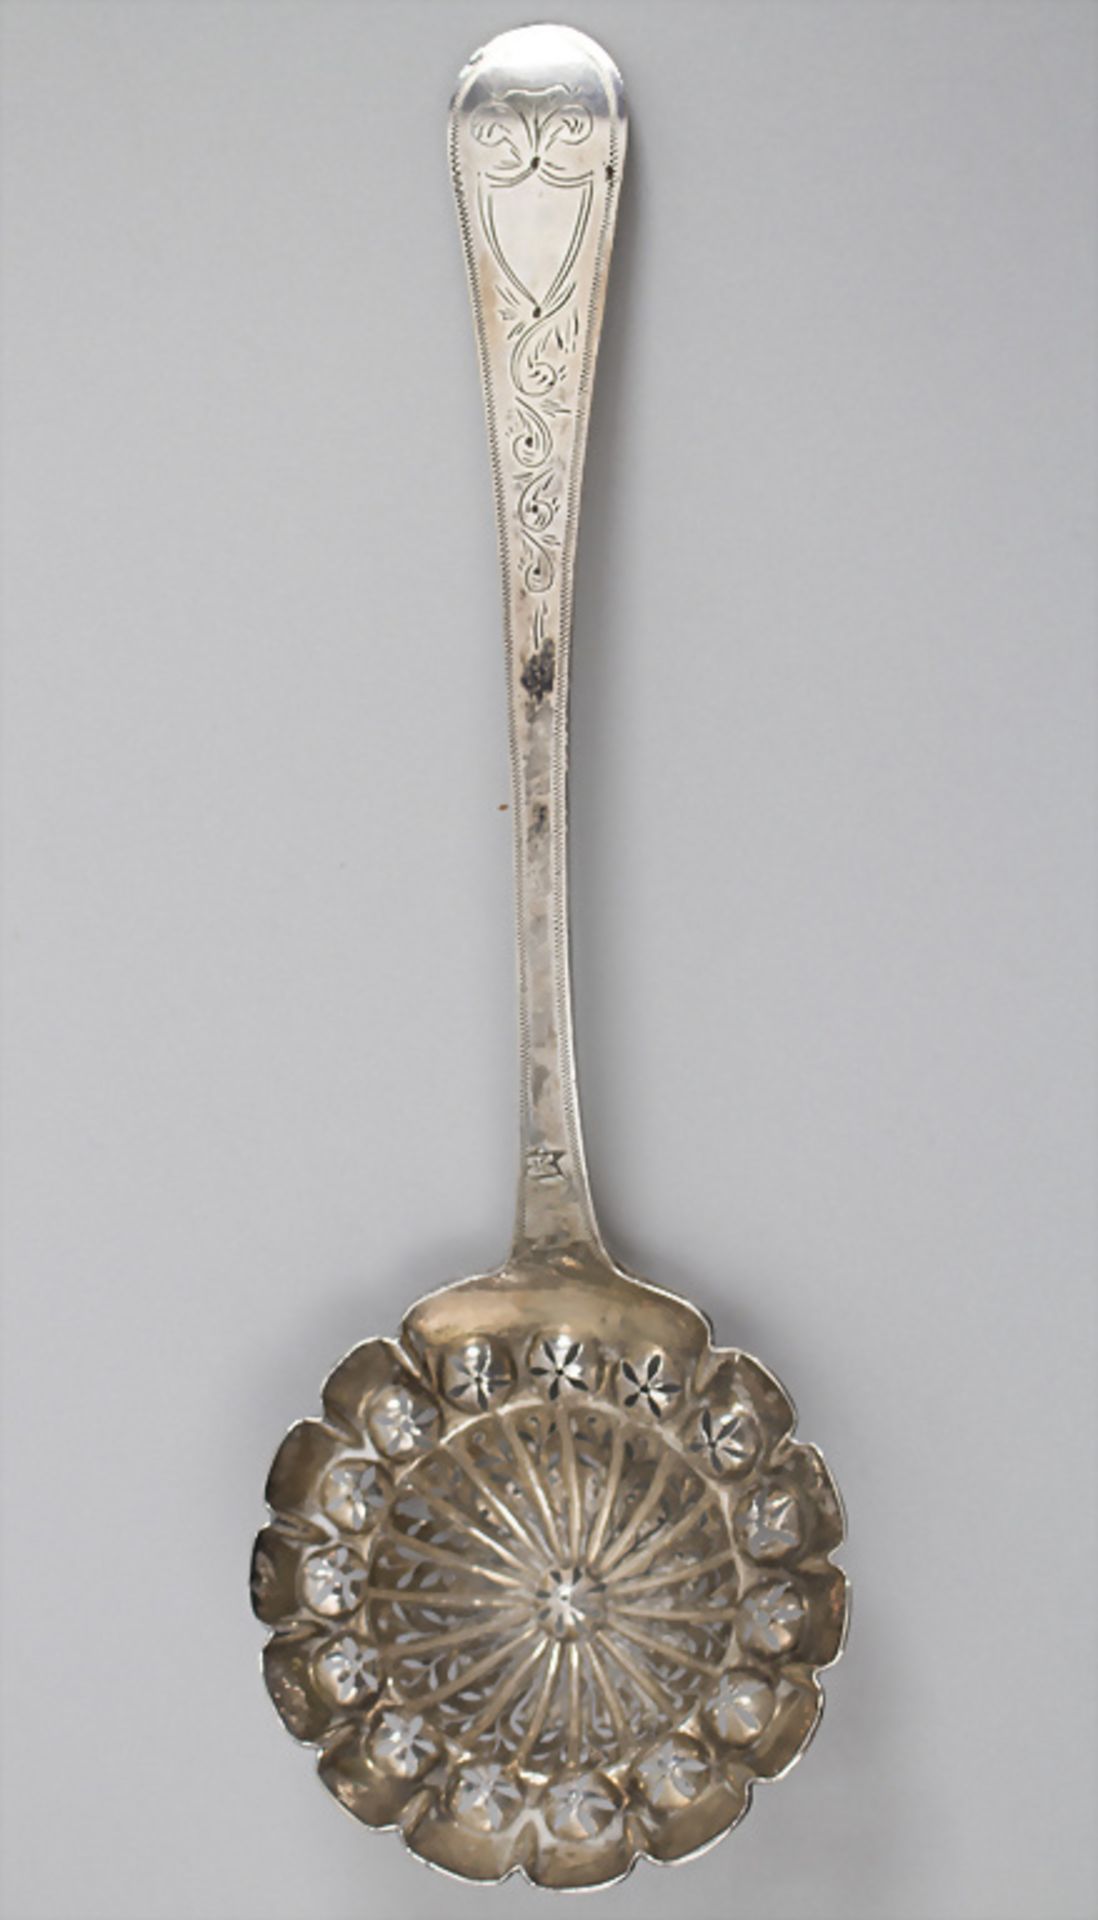 Zuckerstreulöffel / cuillère à sucre / saupoudreuse / A silver sugar-sprinkler spoon with a ...